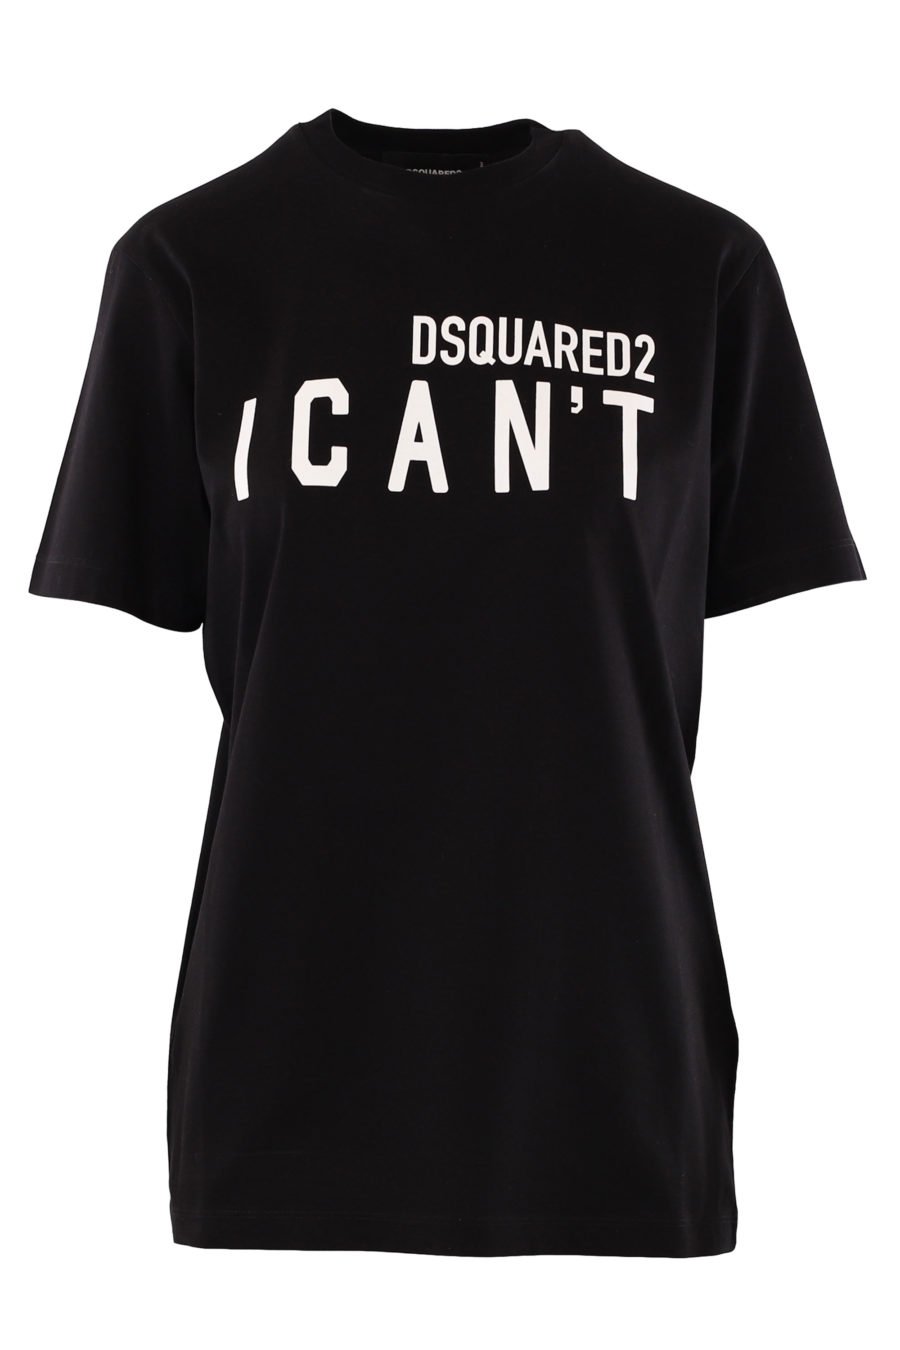 Black T-shirt with "I can't" logo - IMG 9859